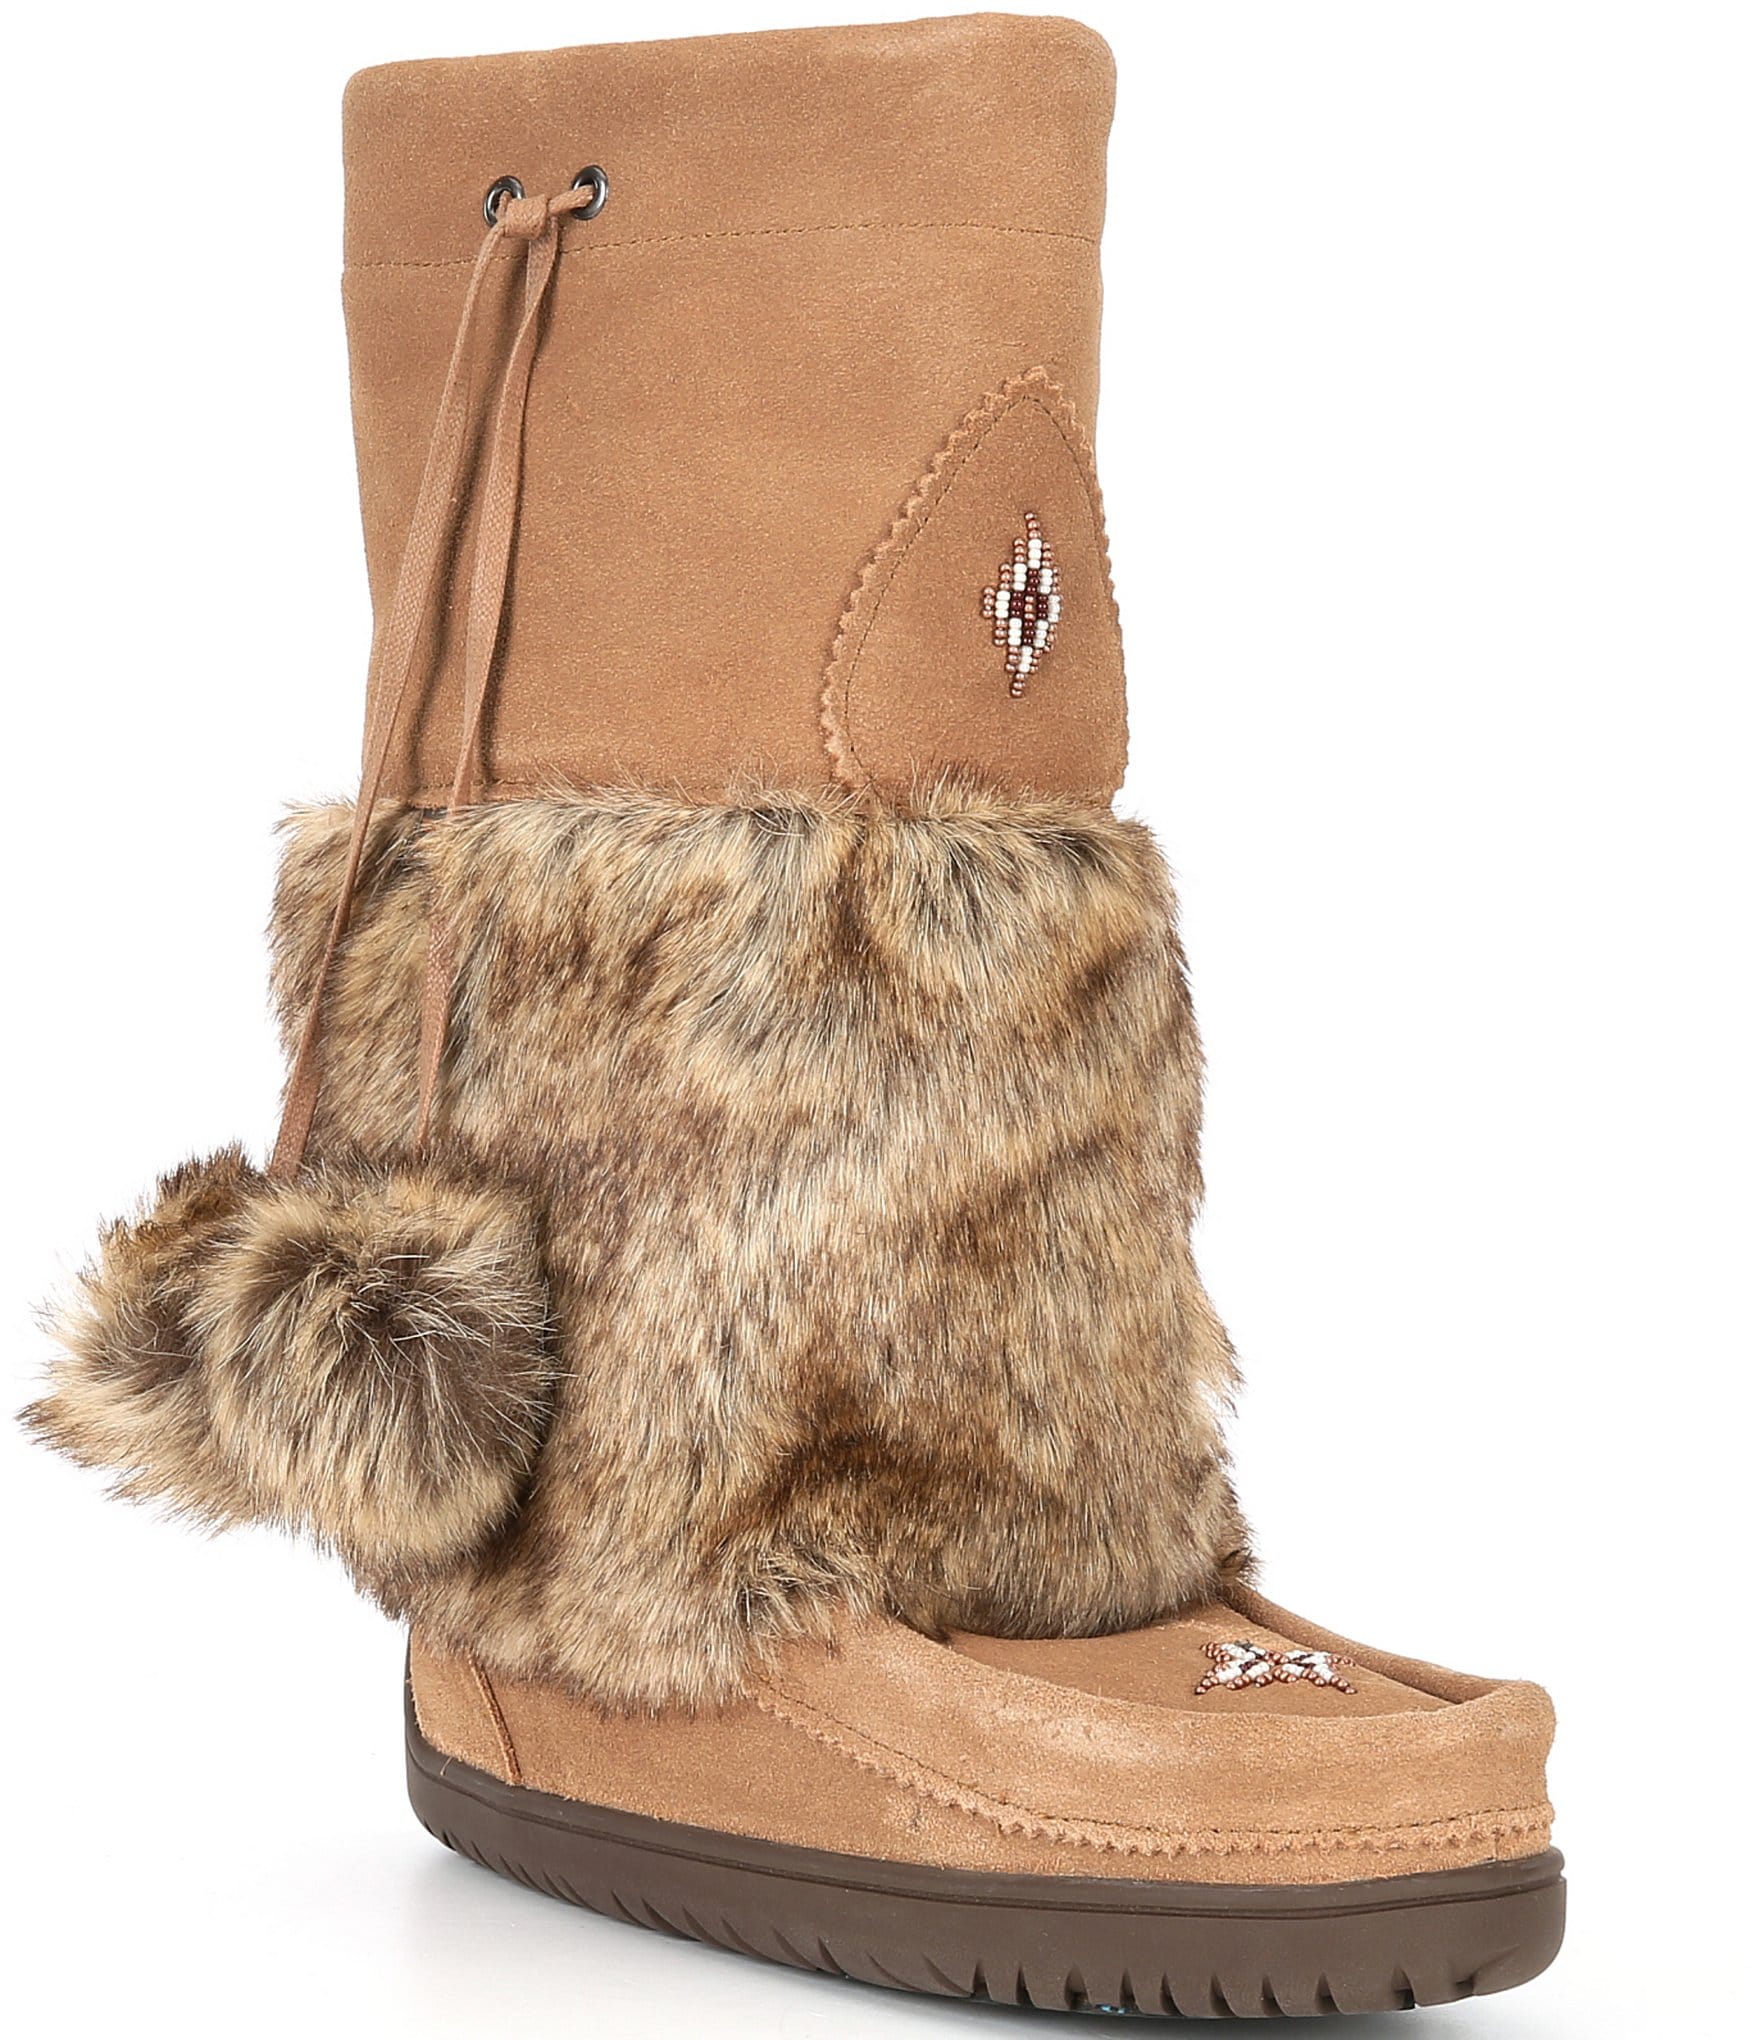 Manitobah Mukluks Snowy Owl Waterproof Suede Faux Fur Cold Weather Mid  Boots